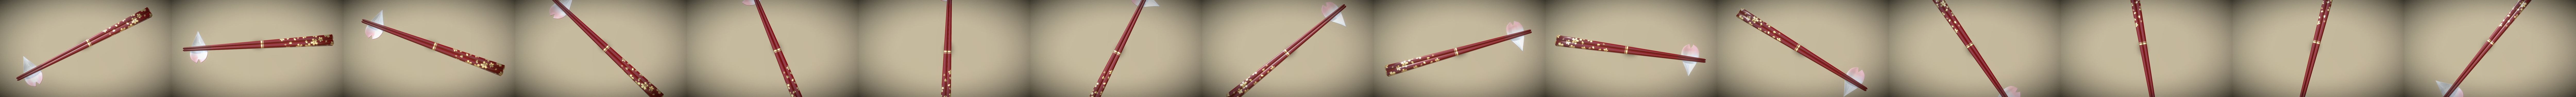 1,118 Origami Chopsticks Images, Stock Photos, 3D objects